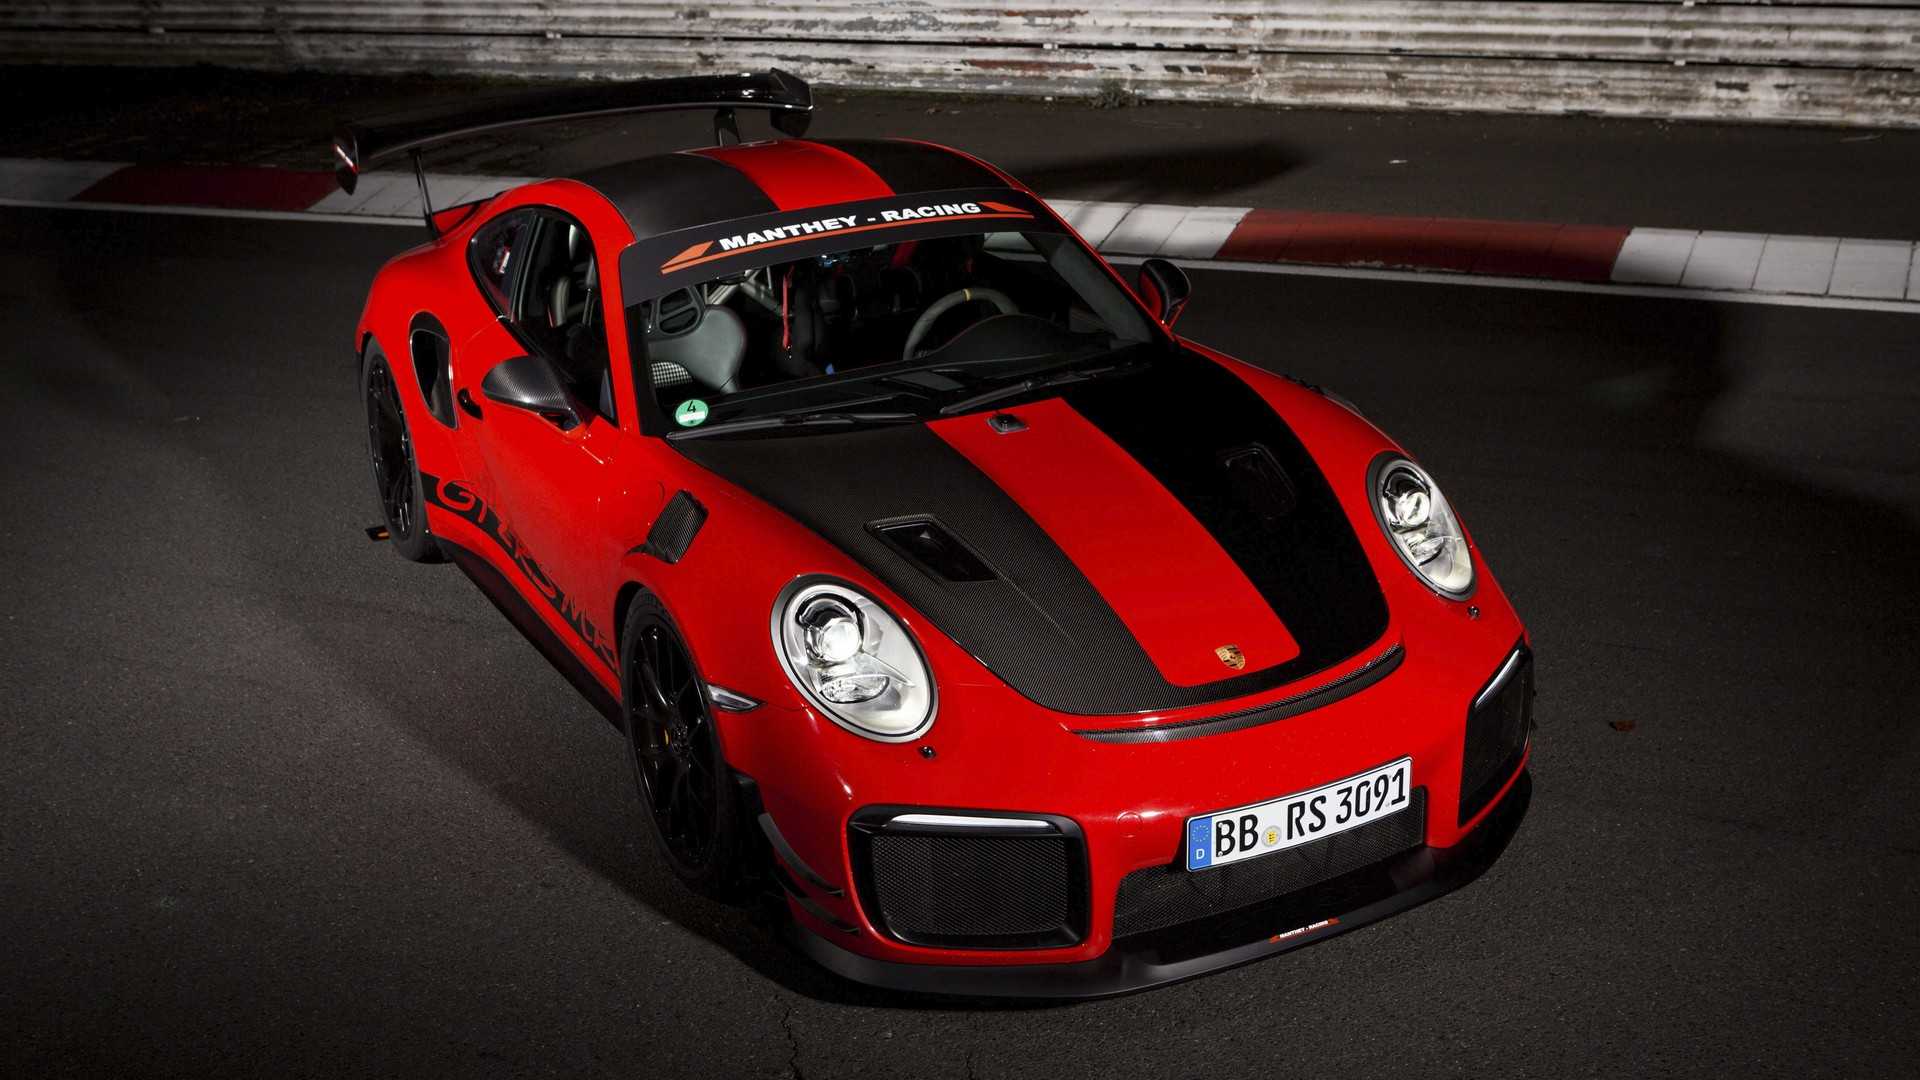 Porsche 911 GT2 RS MR: What You Get And How Much It Costs